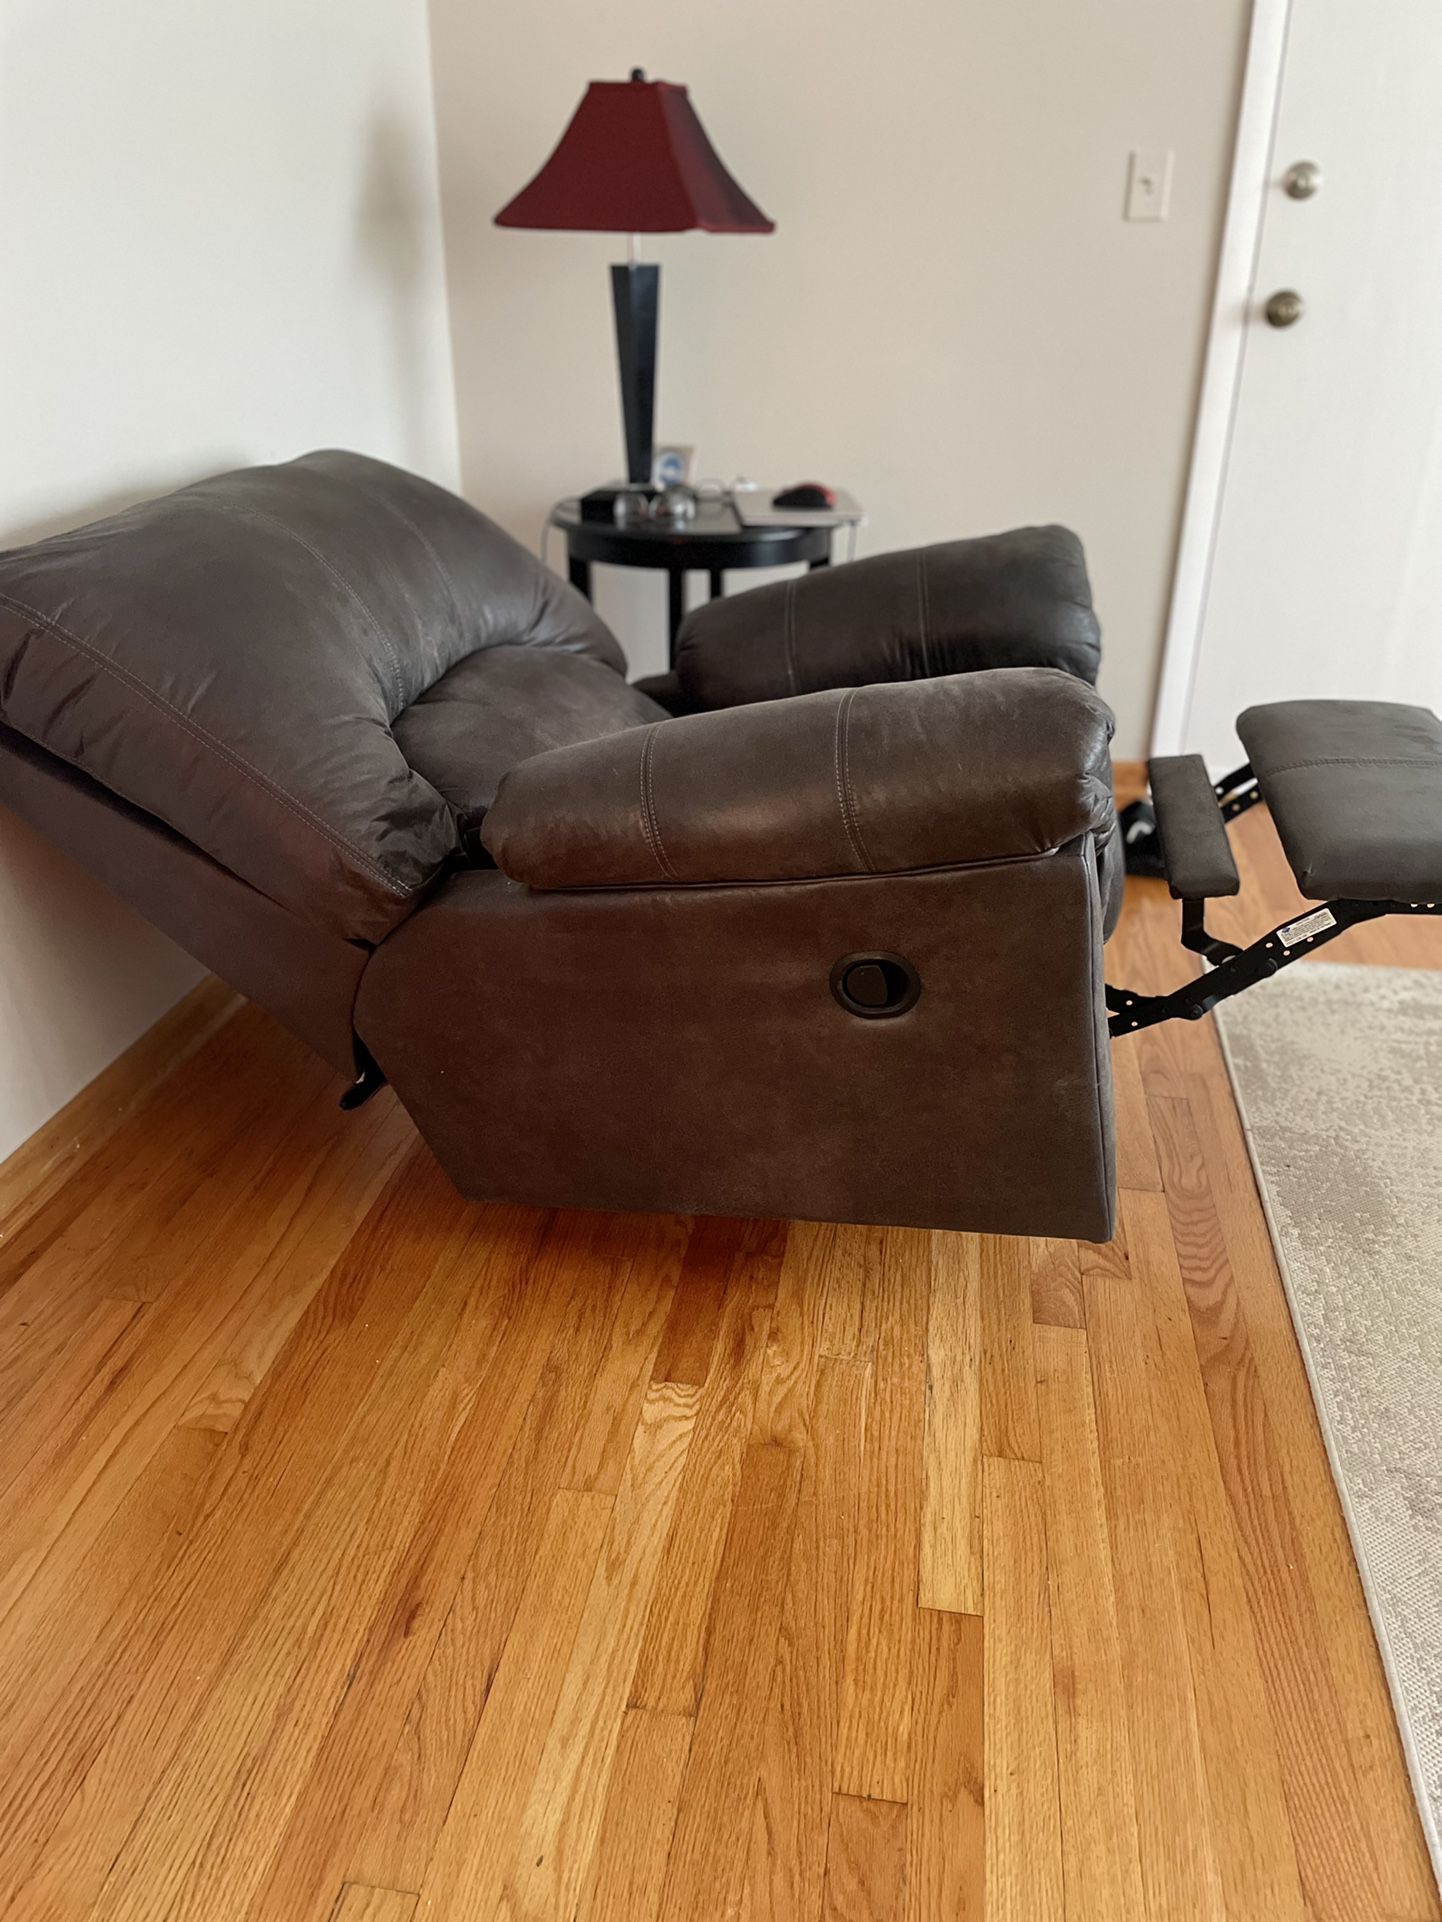 Couch (2 piece With Recliner) and Table Set